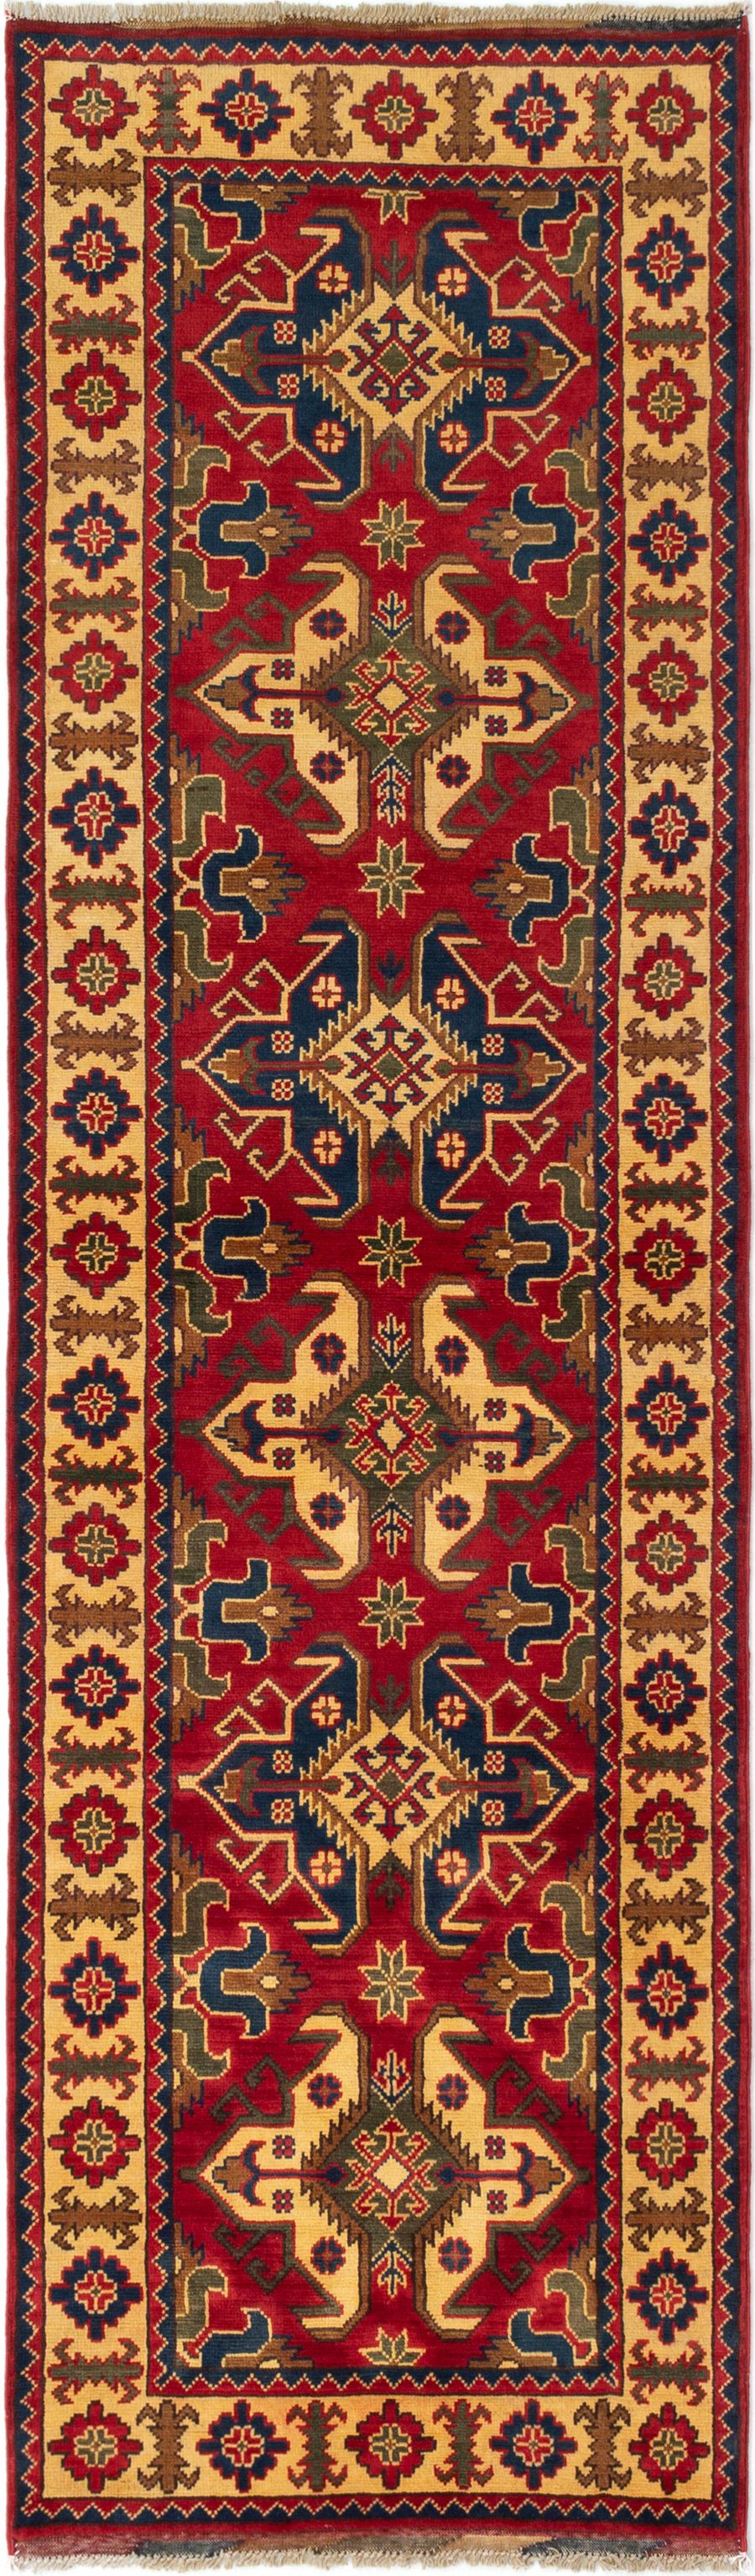 Hand-knotted Finest Kargahi Red Wool Rug 2'10" x 9'7" Size: 2'10" x 9'7"  